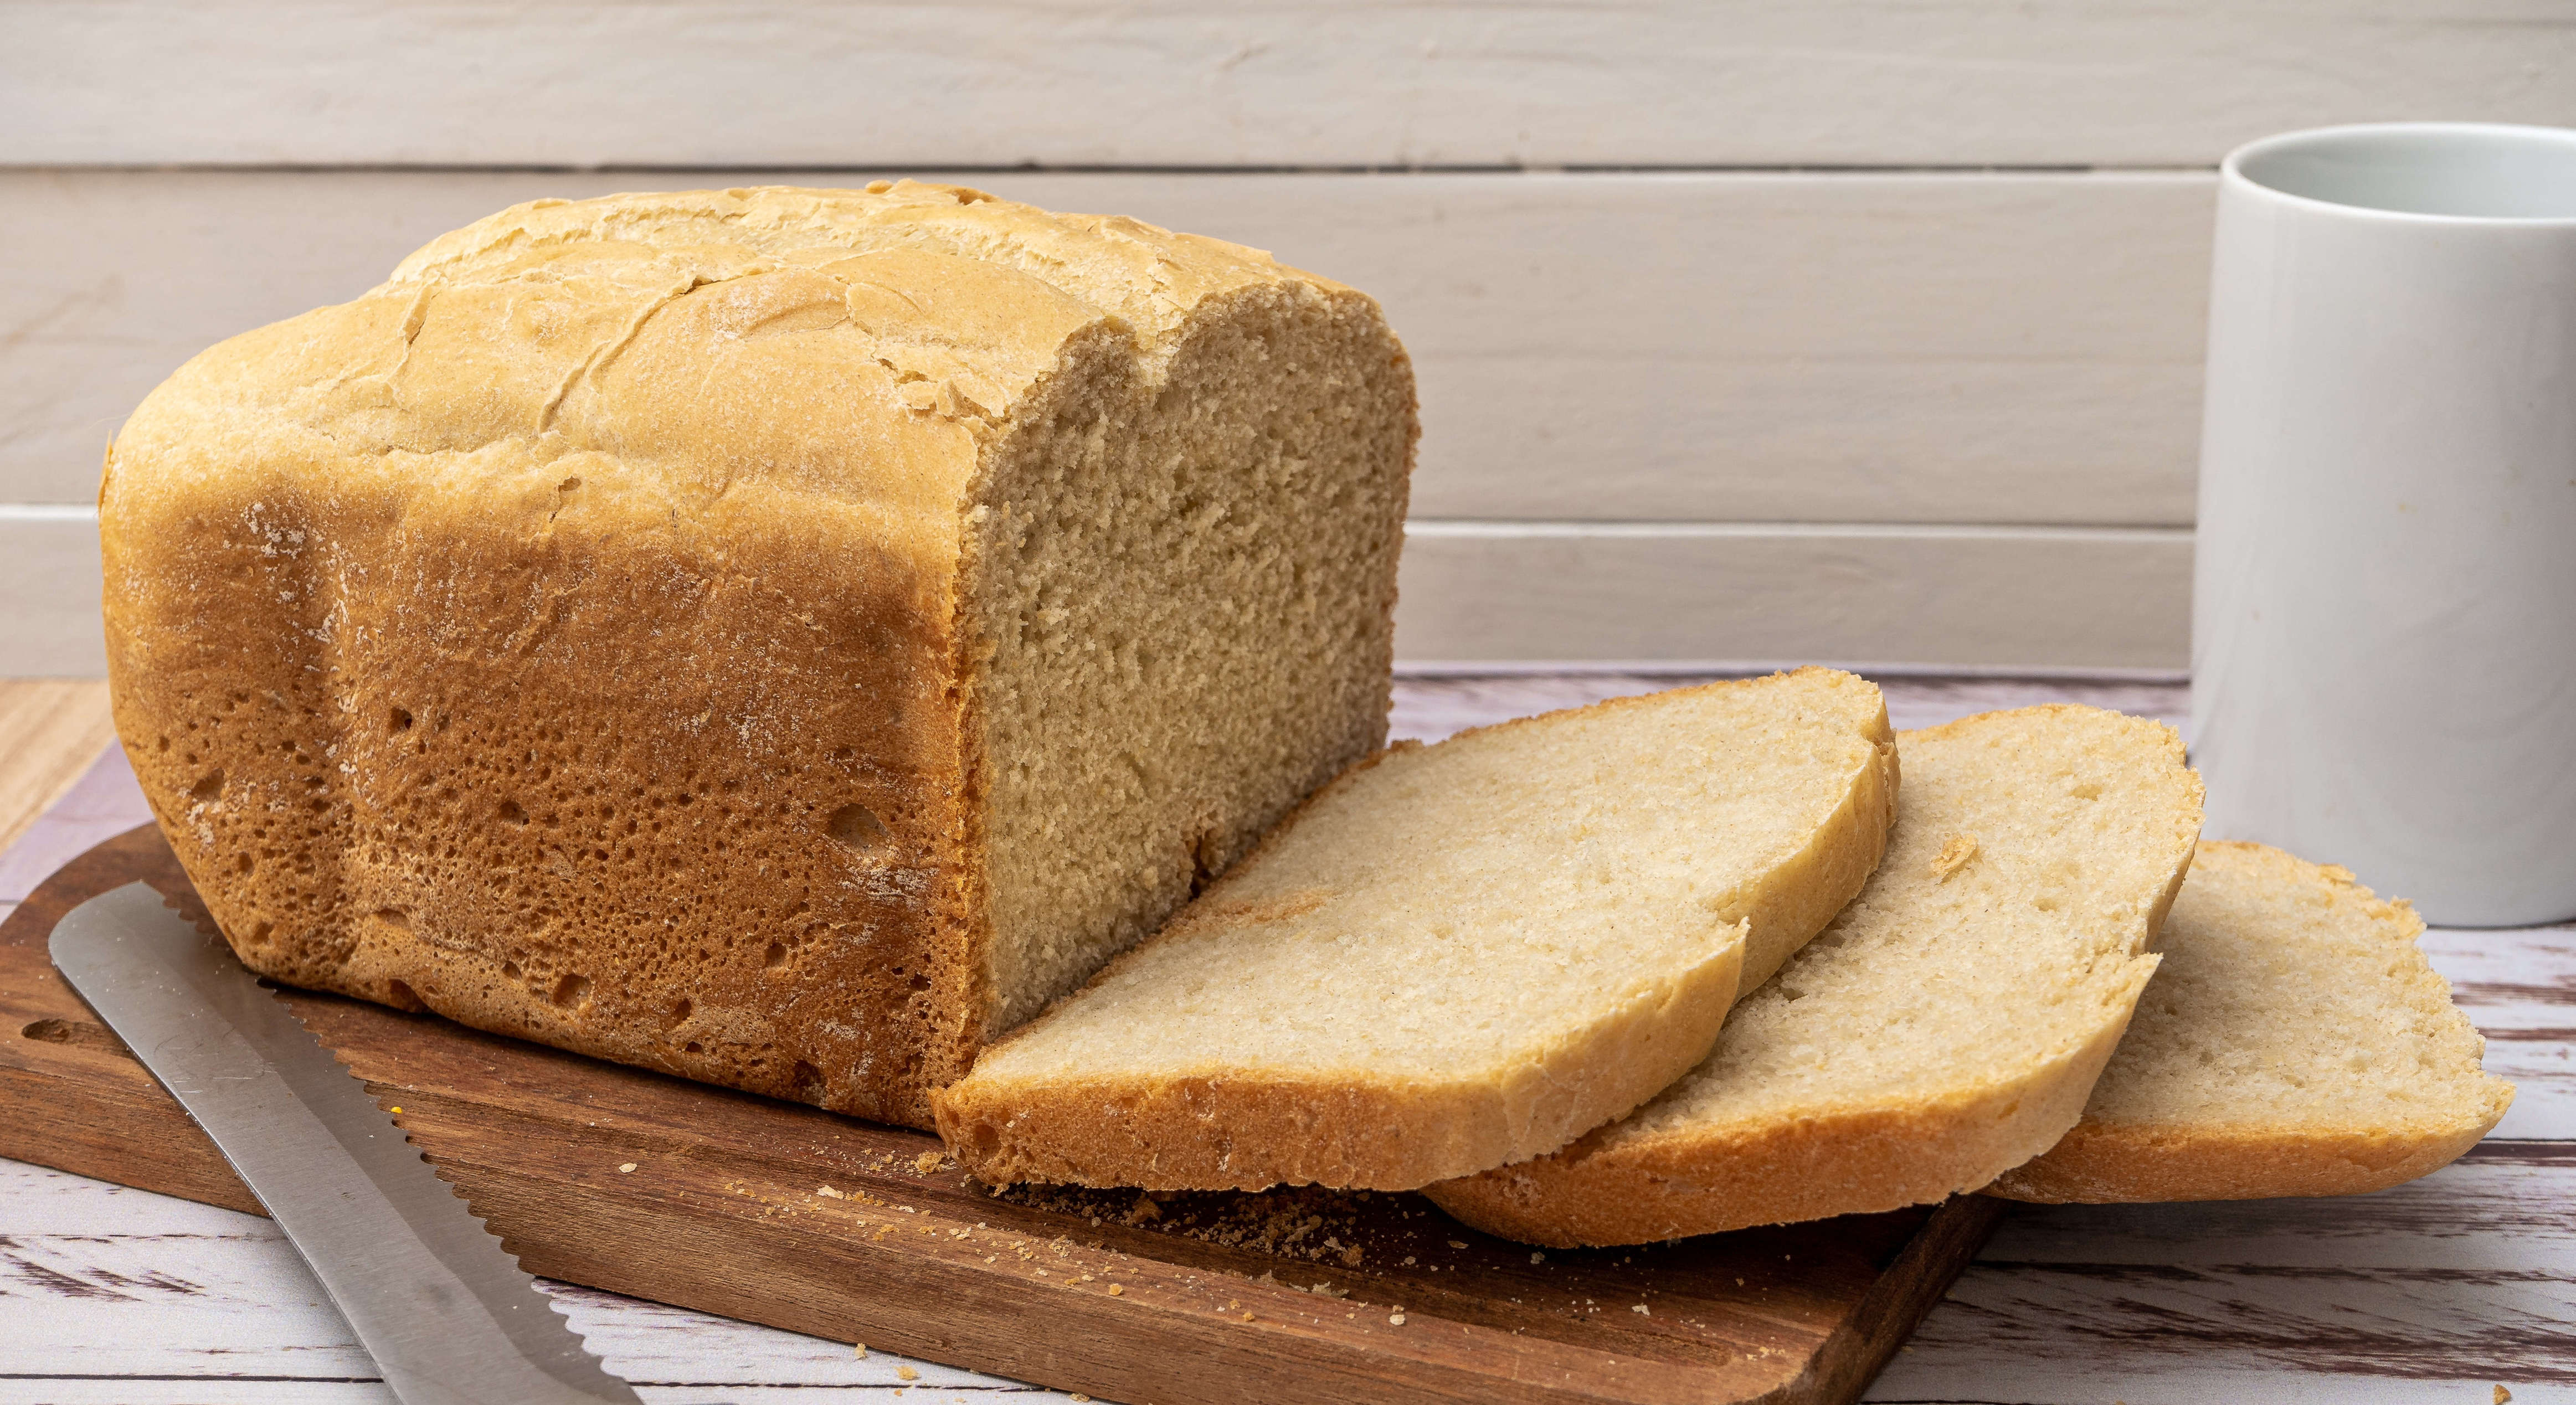 amazon, 5 things to know before buying a bread maker — here’s what i learned